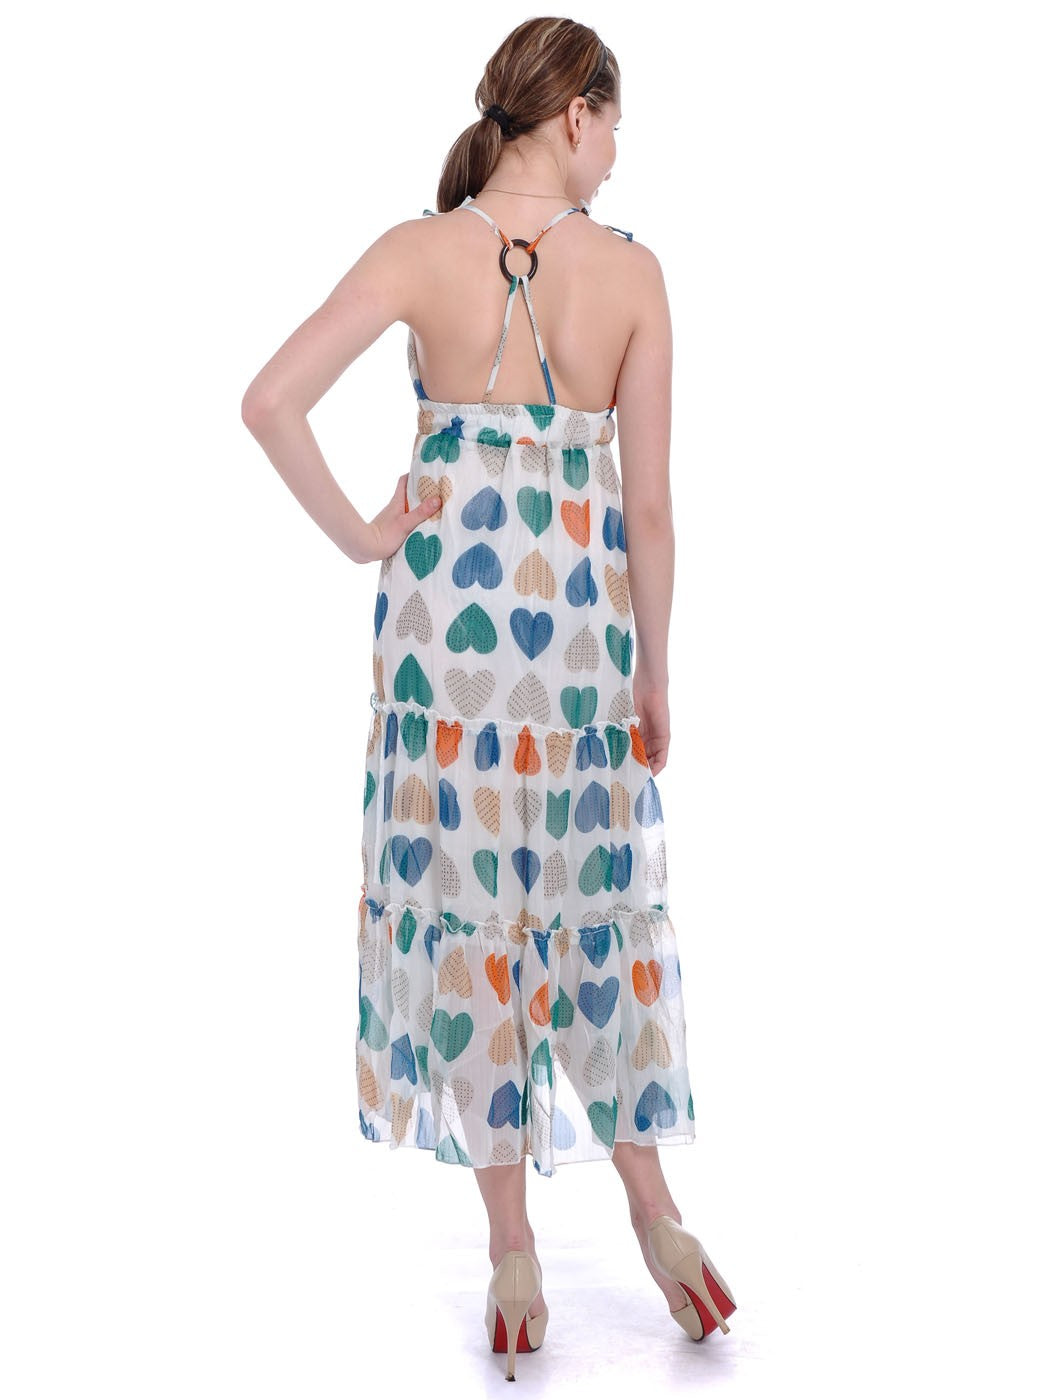 All Over Rows of Vertical Hearts Print Dress